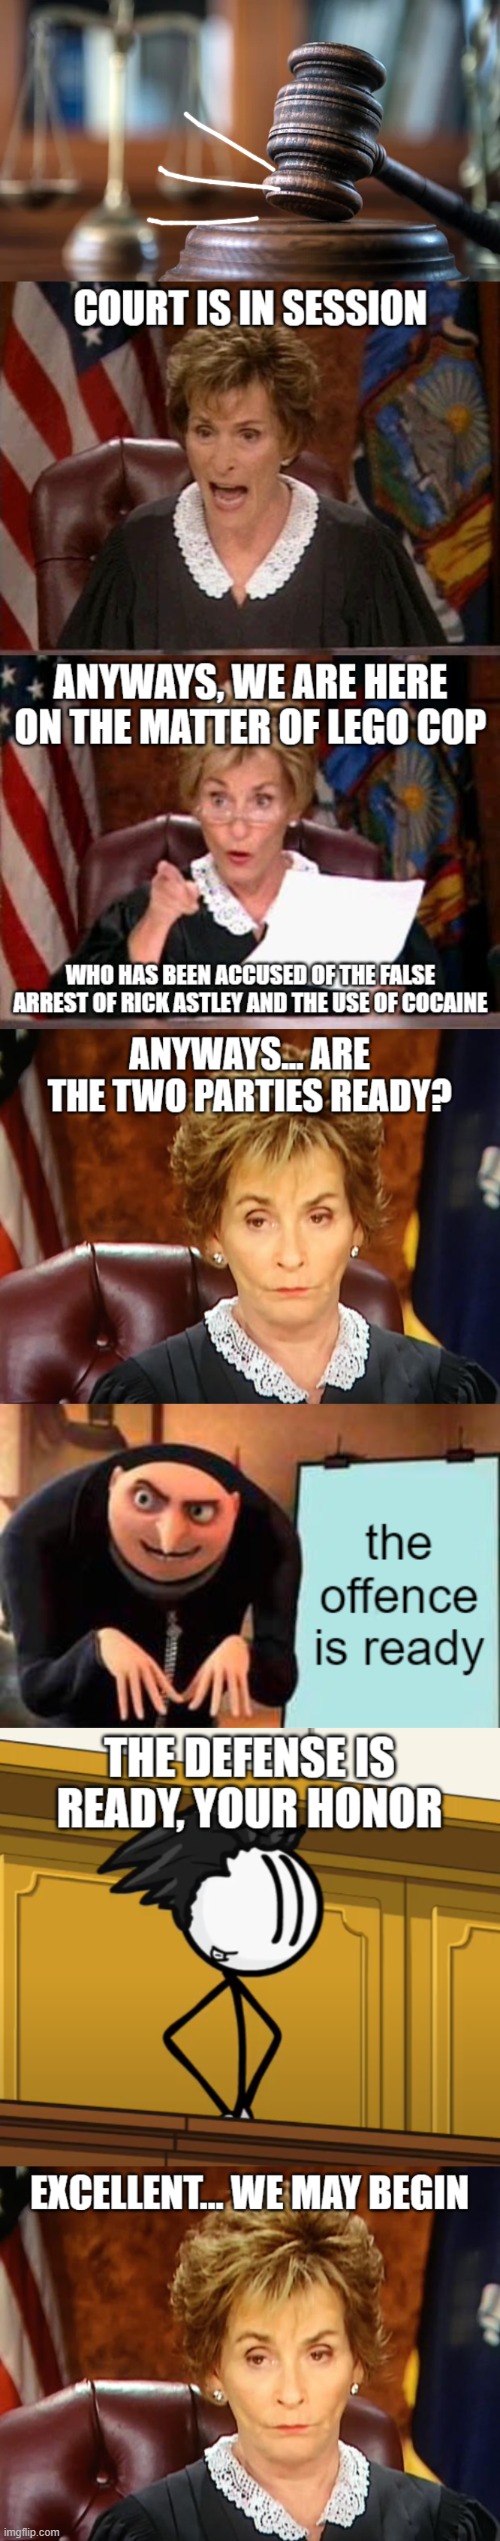 Court is in session | made w/ Imgflip meme maker